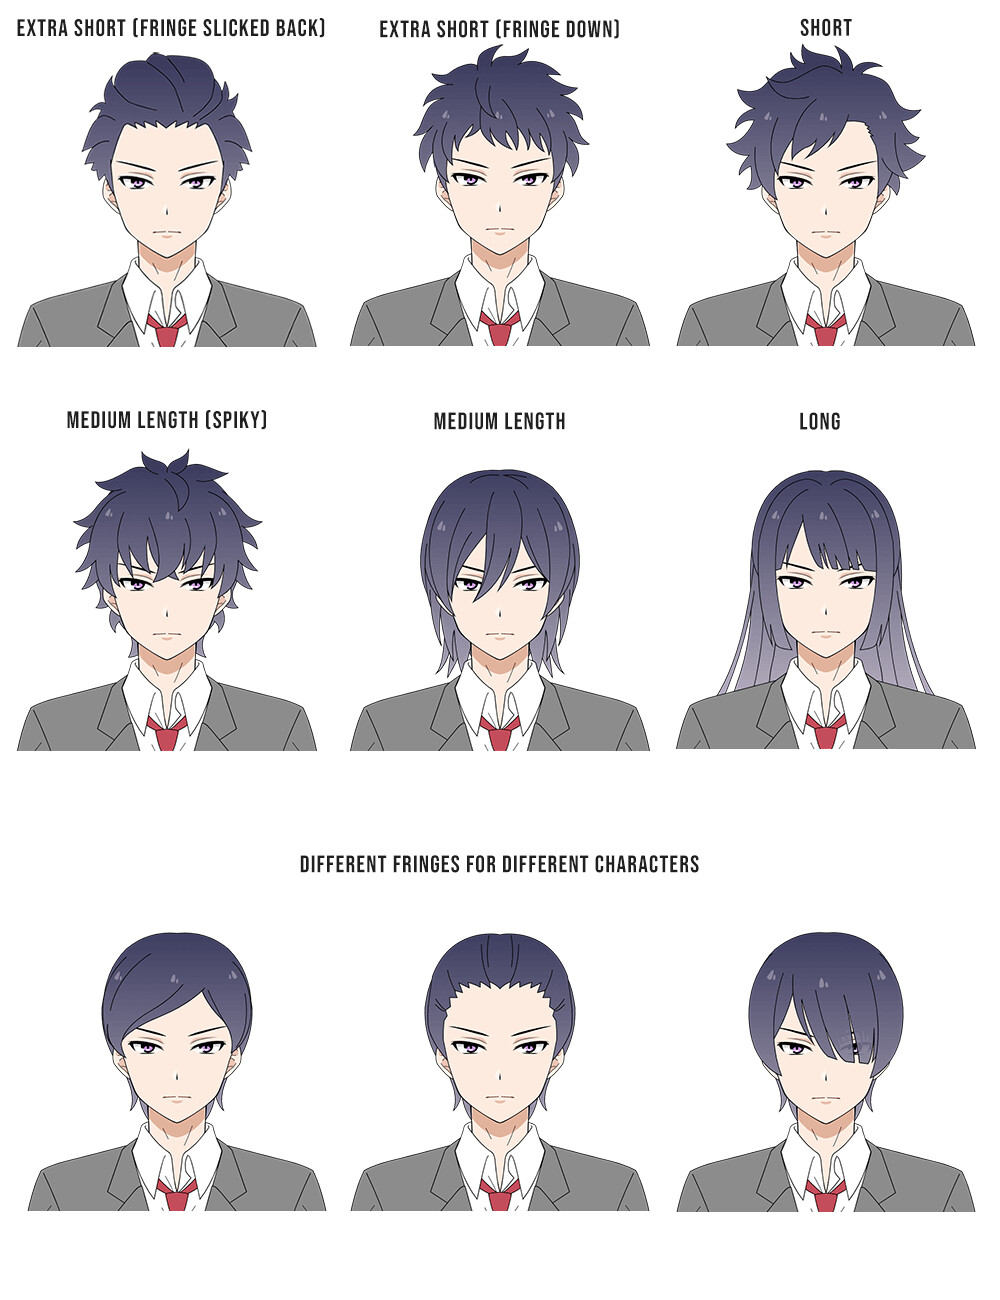 ArtStation - Anime hairstyles for men: how does the hair we choose affect  our character's image?